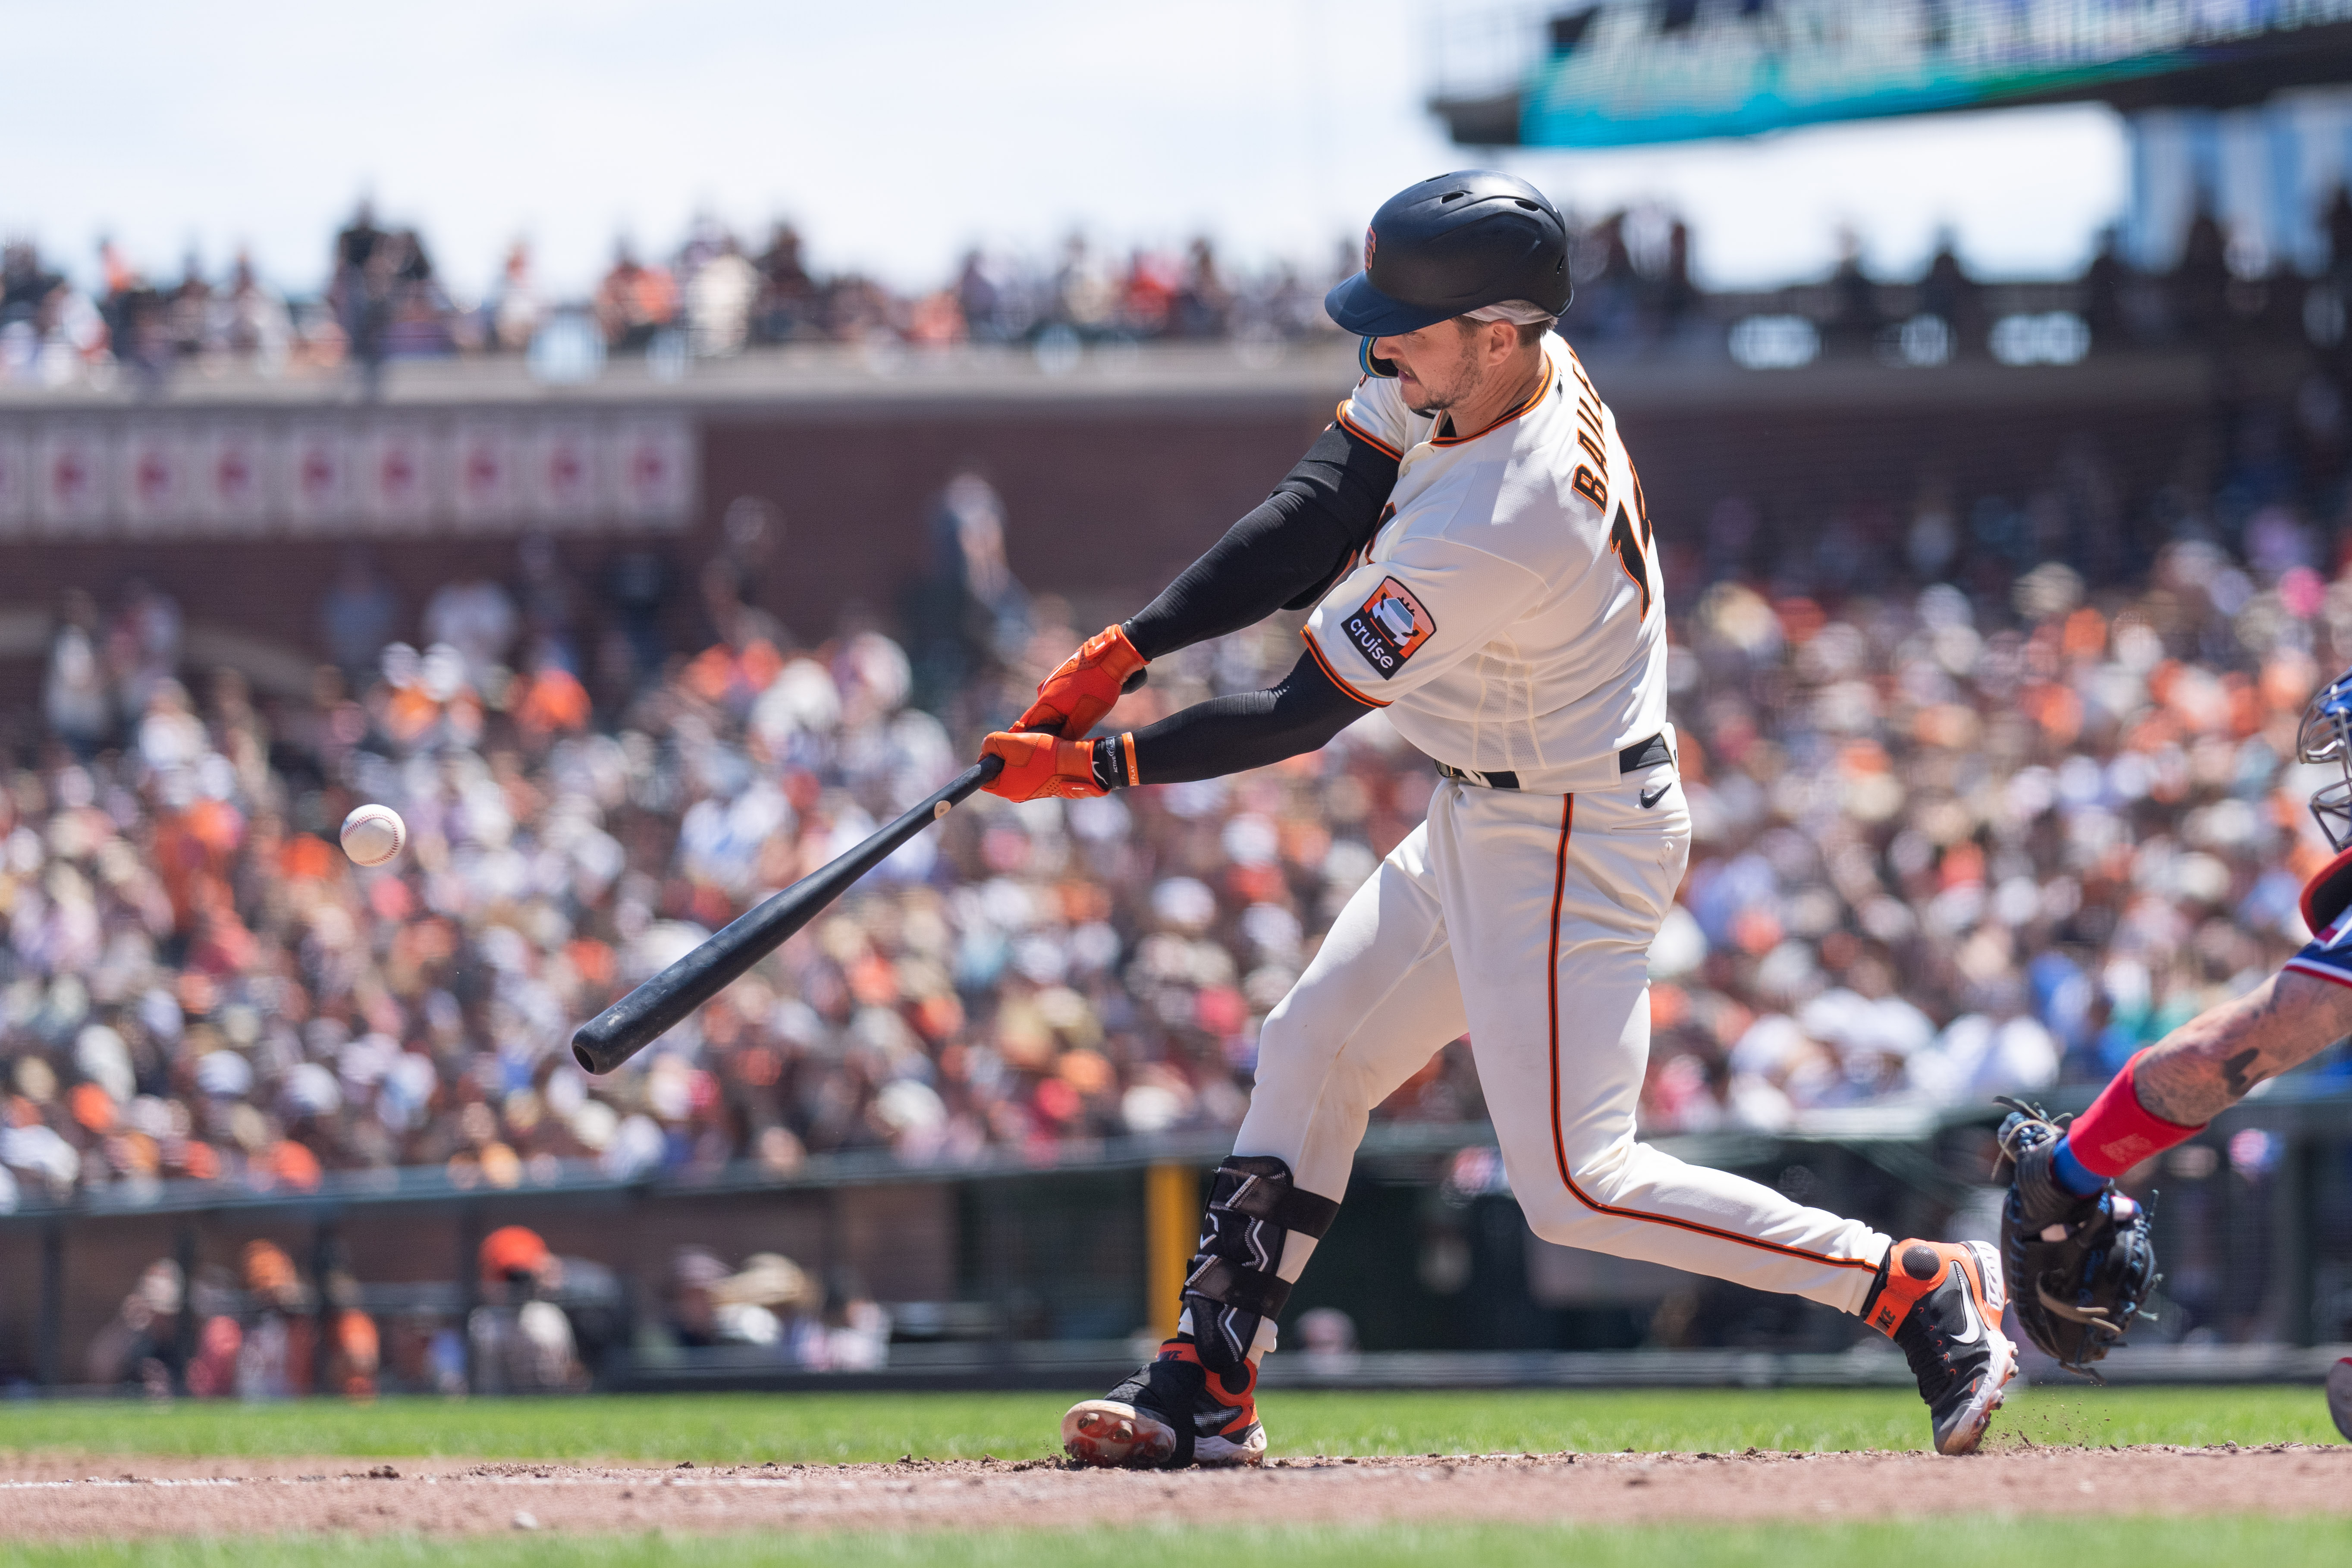 San Francisco Giant outfielder Luis González (51)at bat during MLB regular  season game between the Oakland Athletics and San Francisco Giants at  Oracle Park in San Francisco, Calif. on Apr. 27, 2022.